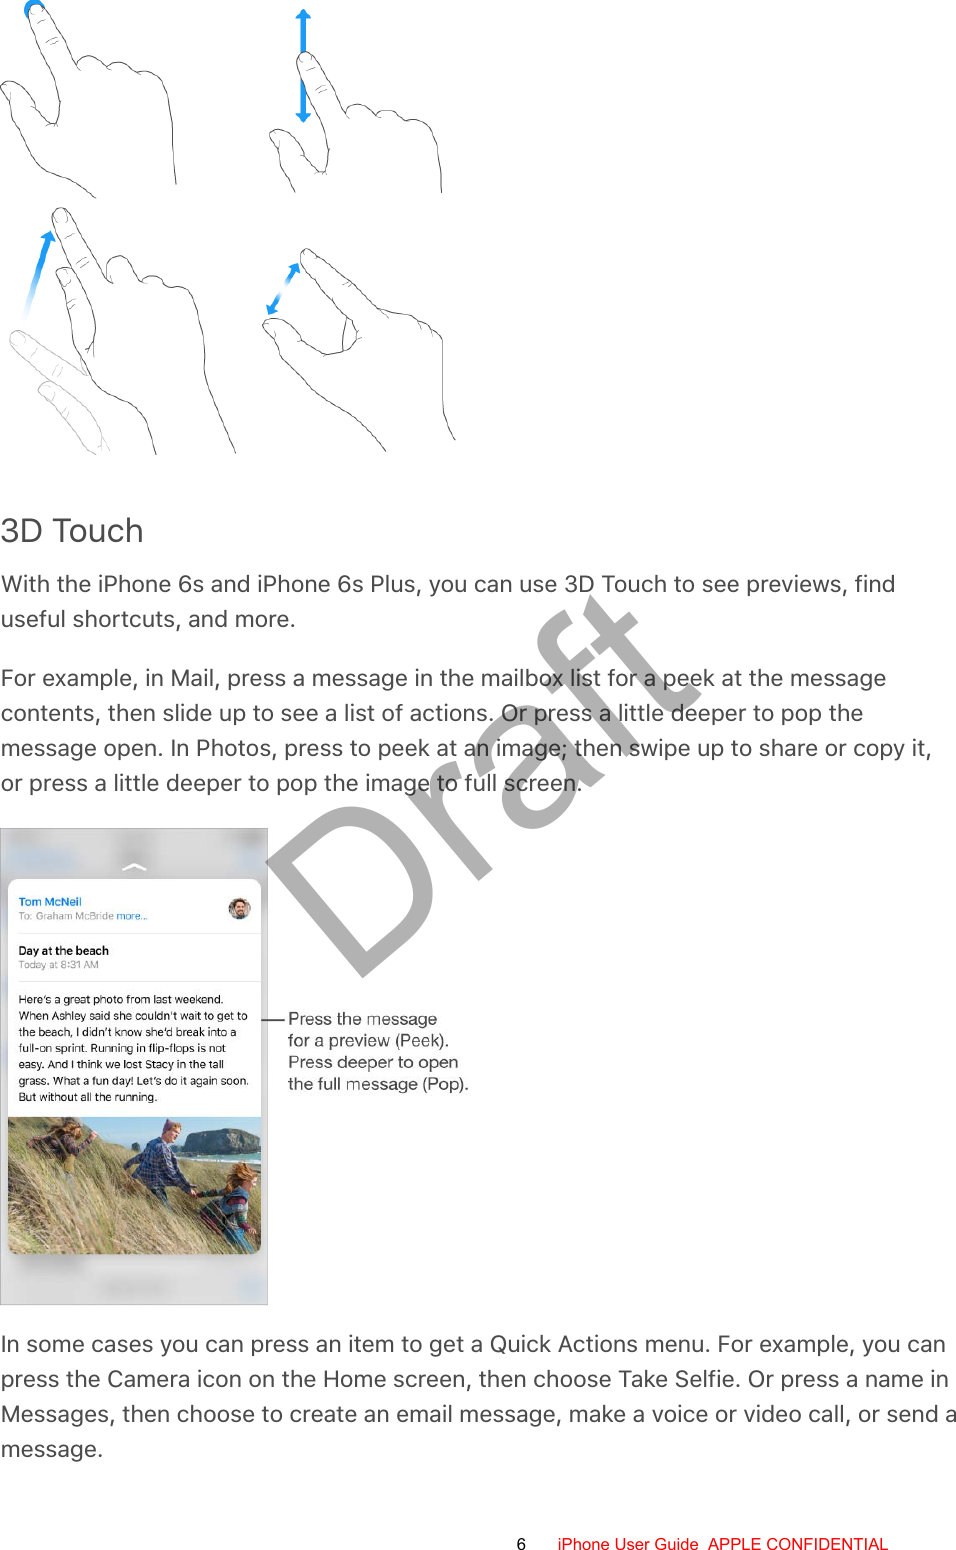 3D TouchWith the iPhone 6s and iPhone 6s Plus, you can use 3D Touch to see previews, finduseful shortcuts, and more.For example, in Mail, press a message in the mailbox list for a peek at the messagecontents, then slide up to see a list of actions. Or press a little deeper to pop themessage open. In Photos, press to peek at an image; then swipe up to share or copy it,or press a little deeper to pop the image to full screen.In some cases you can press an item to get a Quick Actions menu. For example, you canpress the Camera icon on the Home screen, then choose Take Selfie. Or press a name inMessages, then choose to create an email message, make a voice or video call, or send amessage.6 iPhone User Guide  APPLE CONFIDENTIALDraft